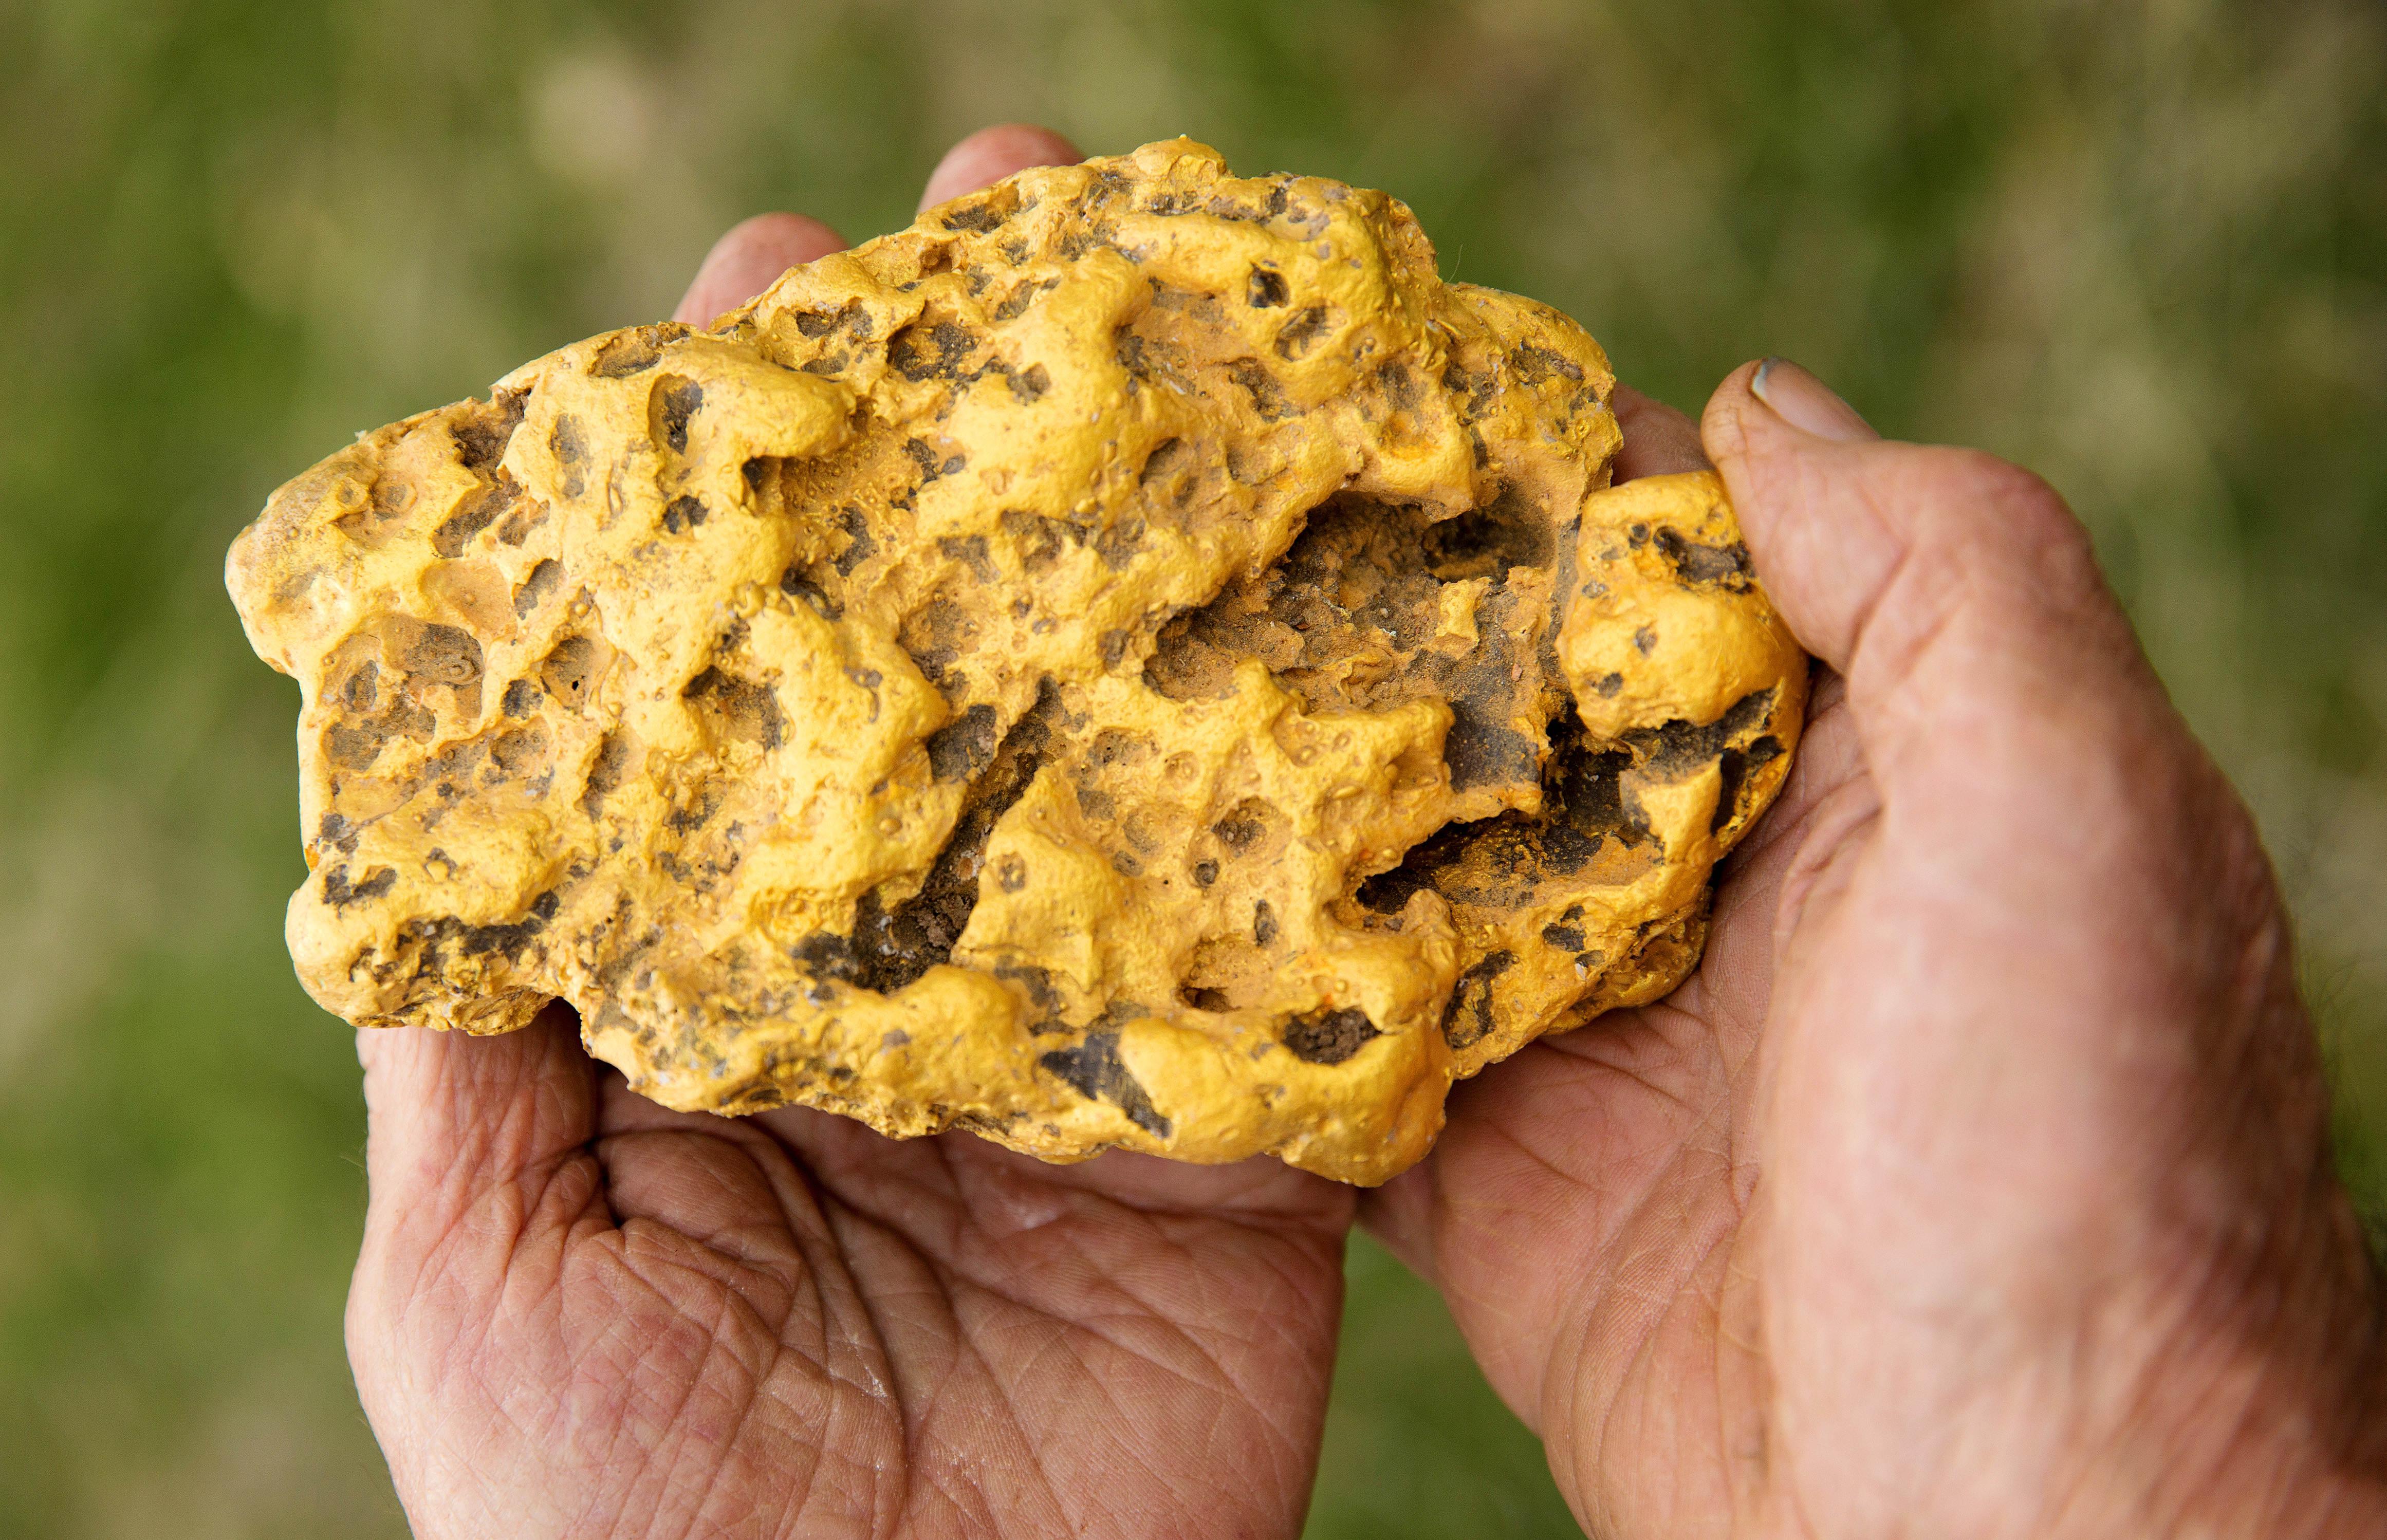 This massive 4.6kg gold nugget was eventually sold to a private buyer in the USA